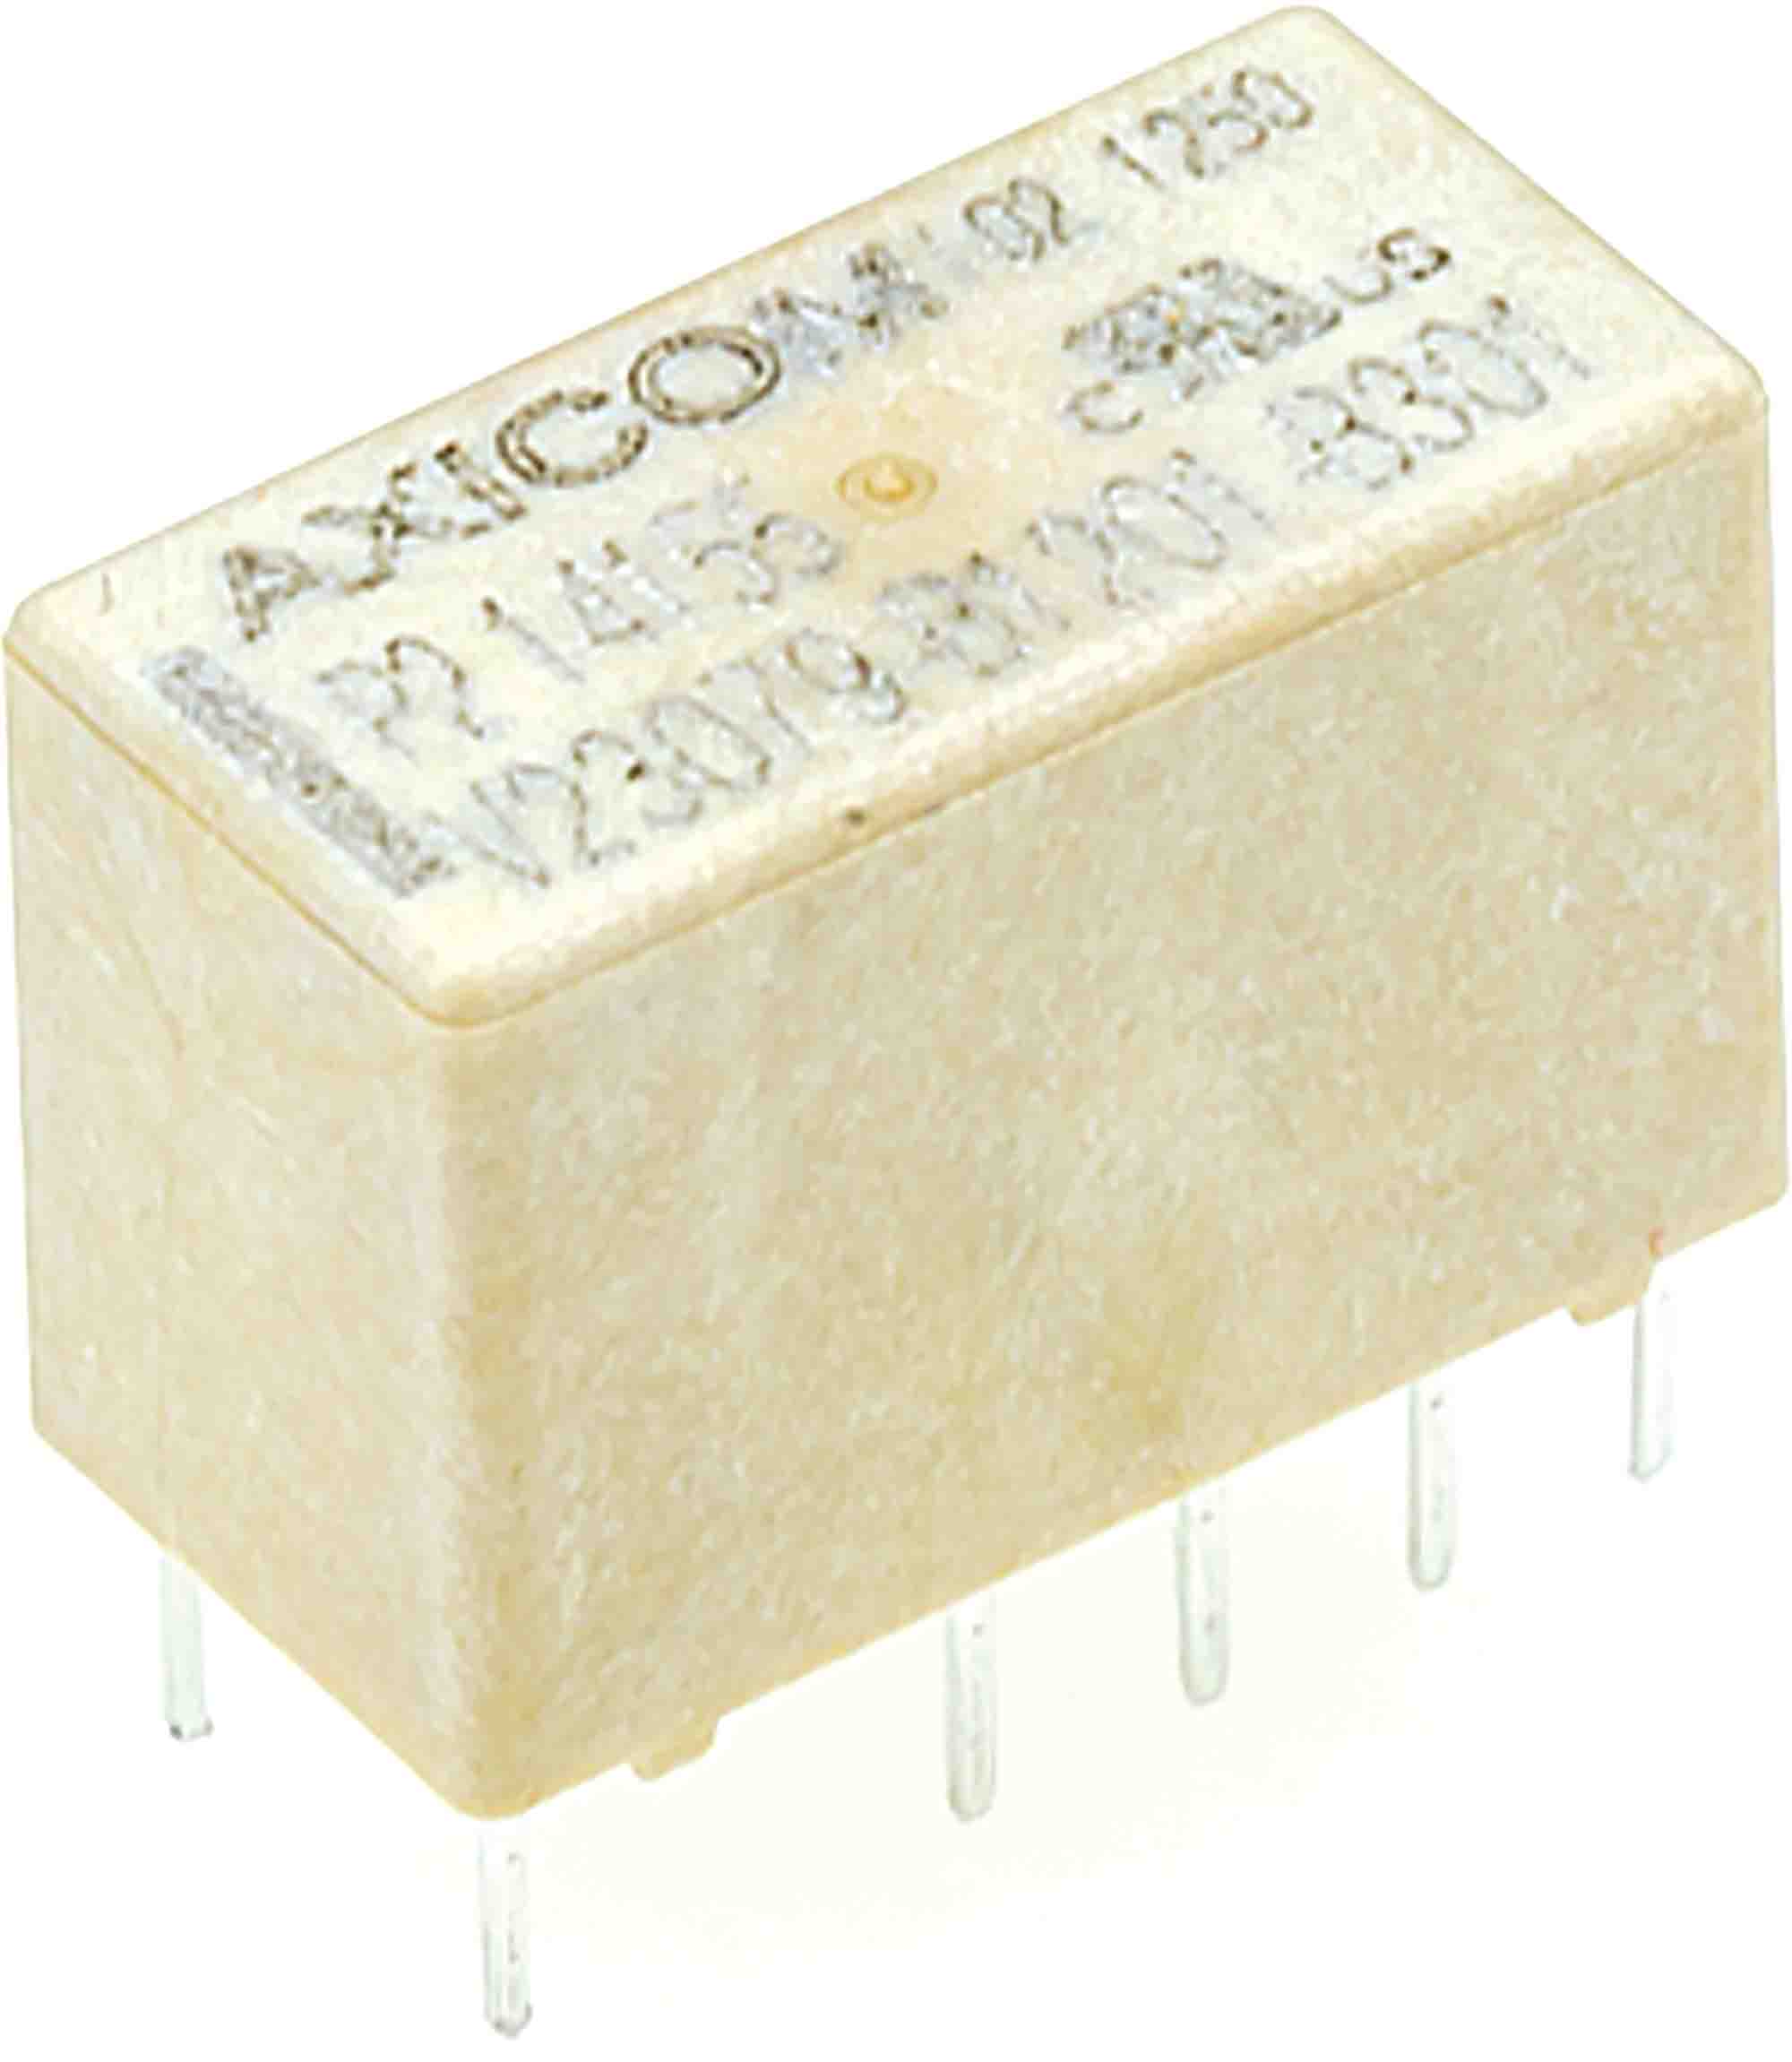 TE Connectivity PCB Mount Latching Signal Relay, 5V dc Coil, 2A Switching Current, DPDT